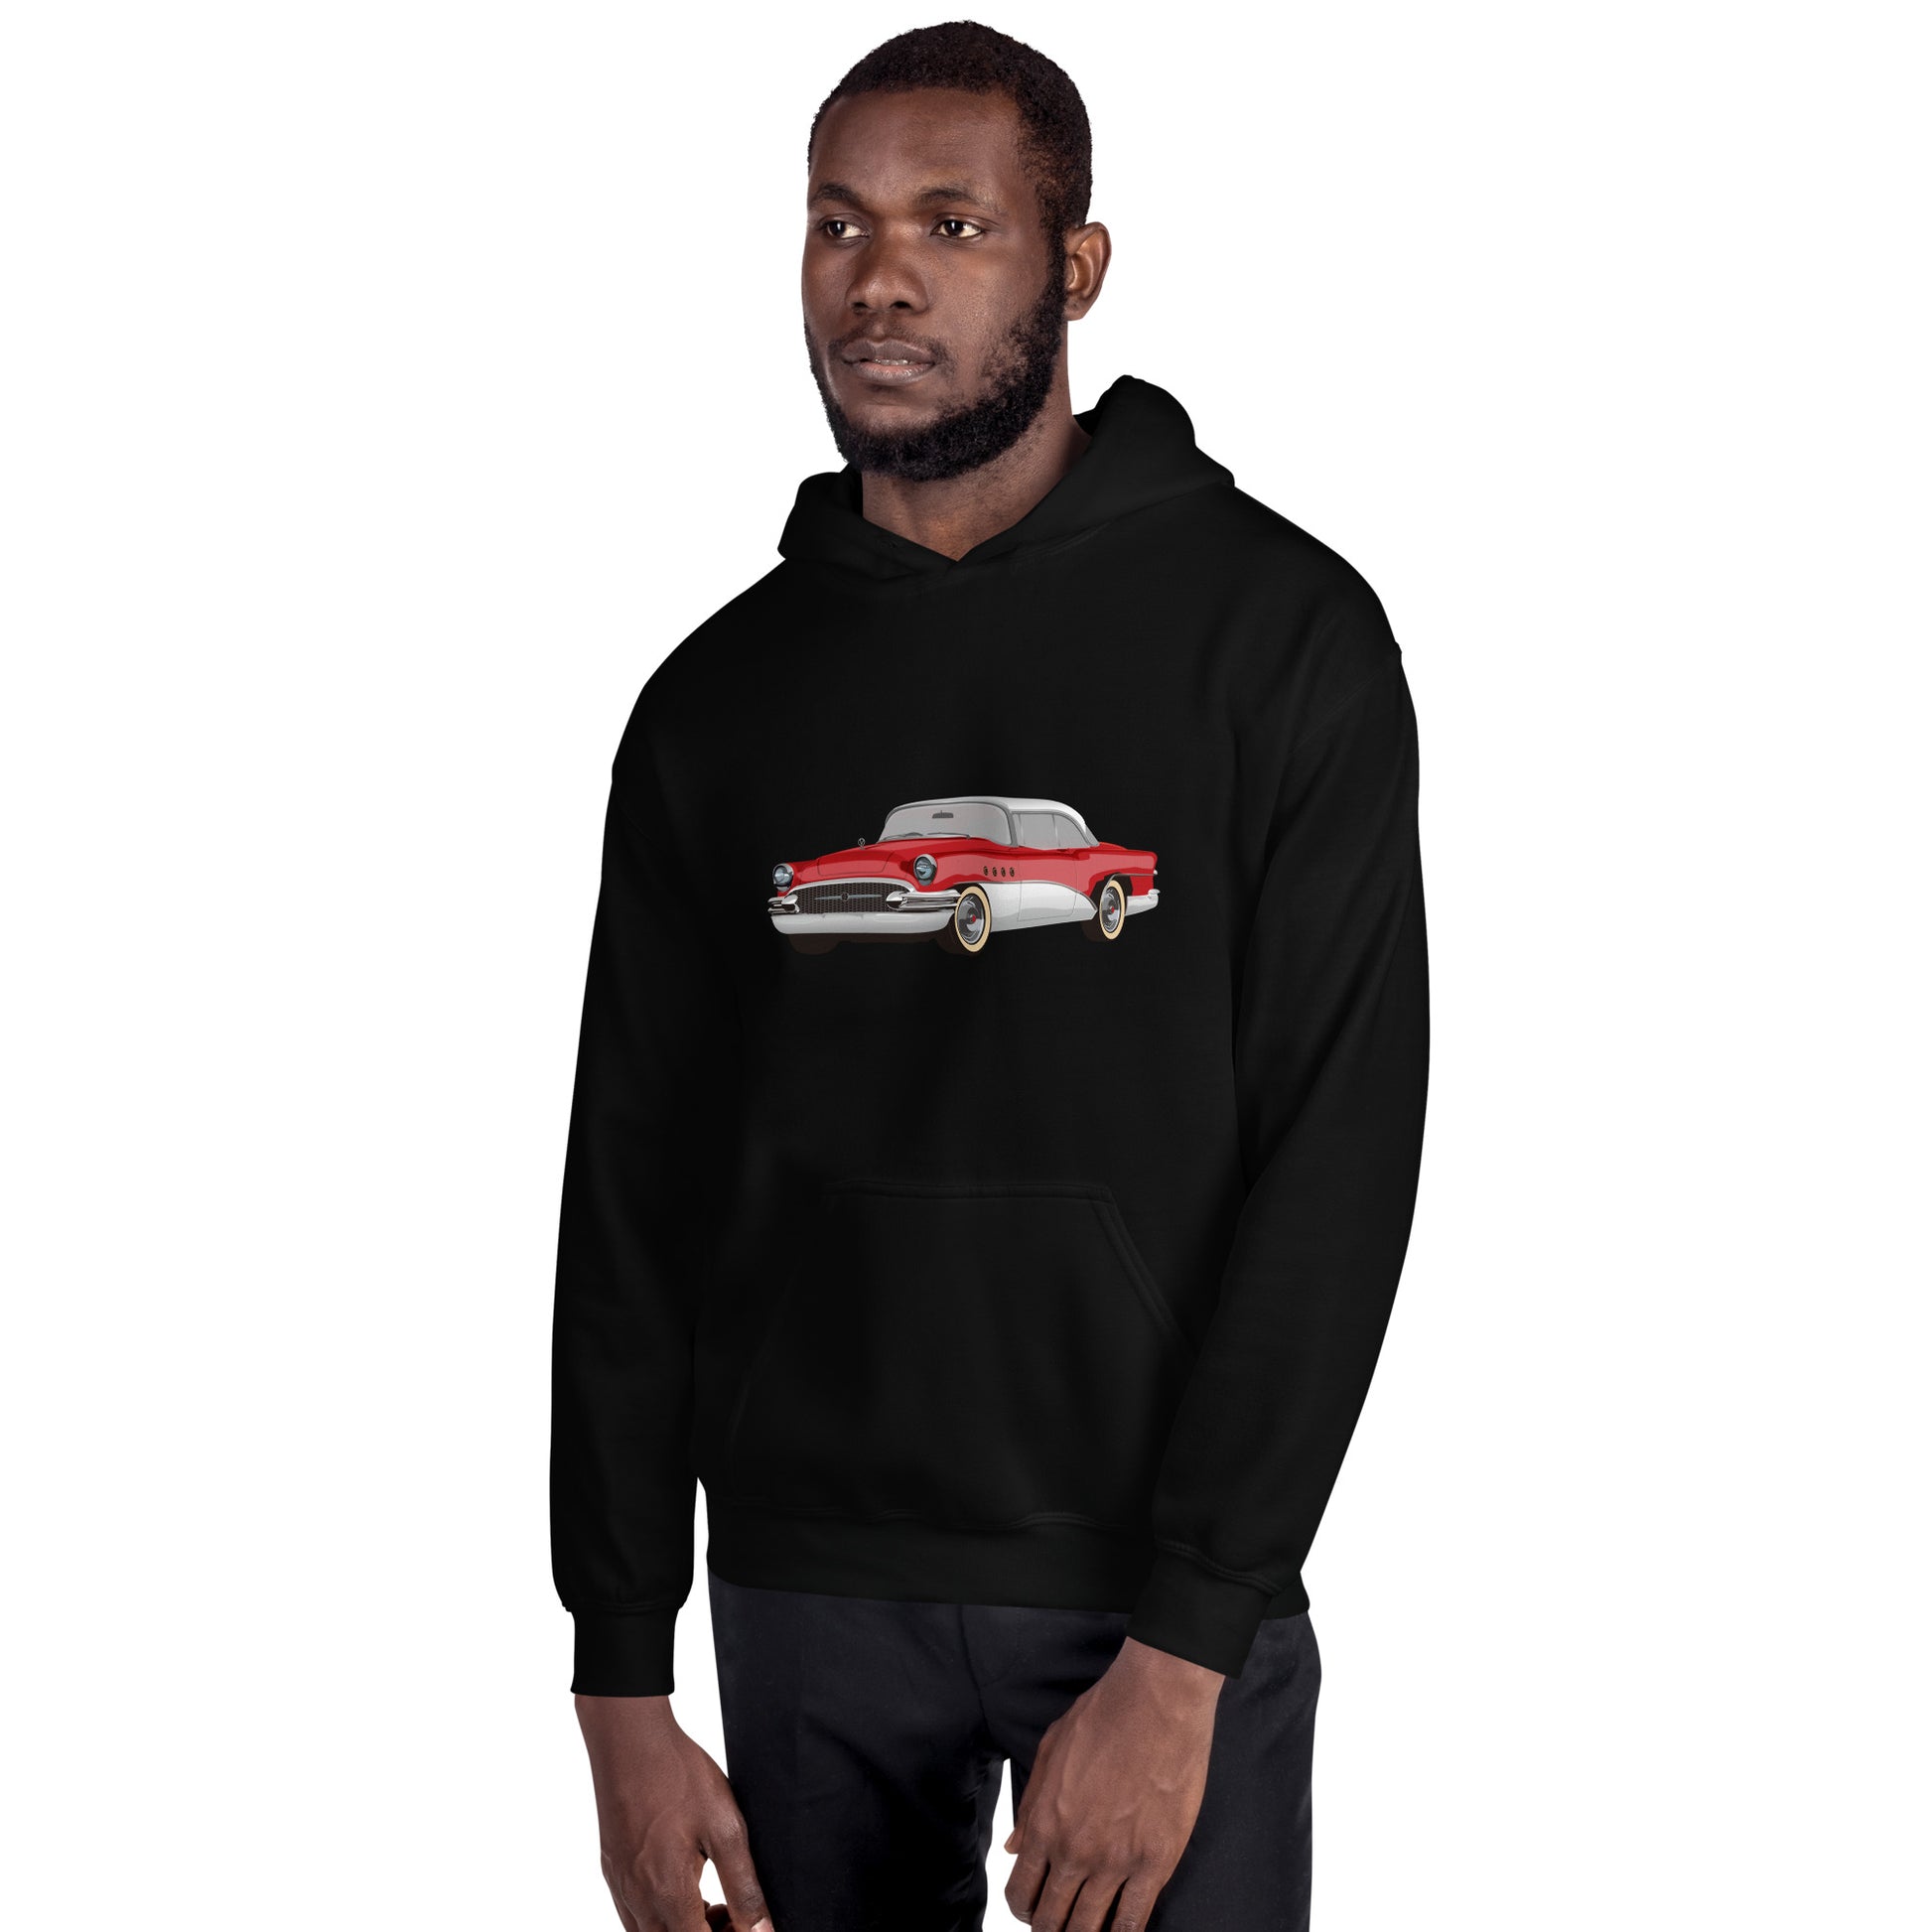 Man with black hoodie with red chevrolet